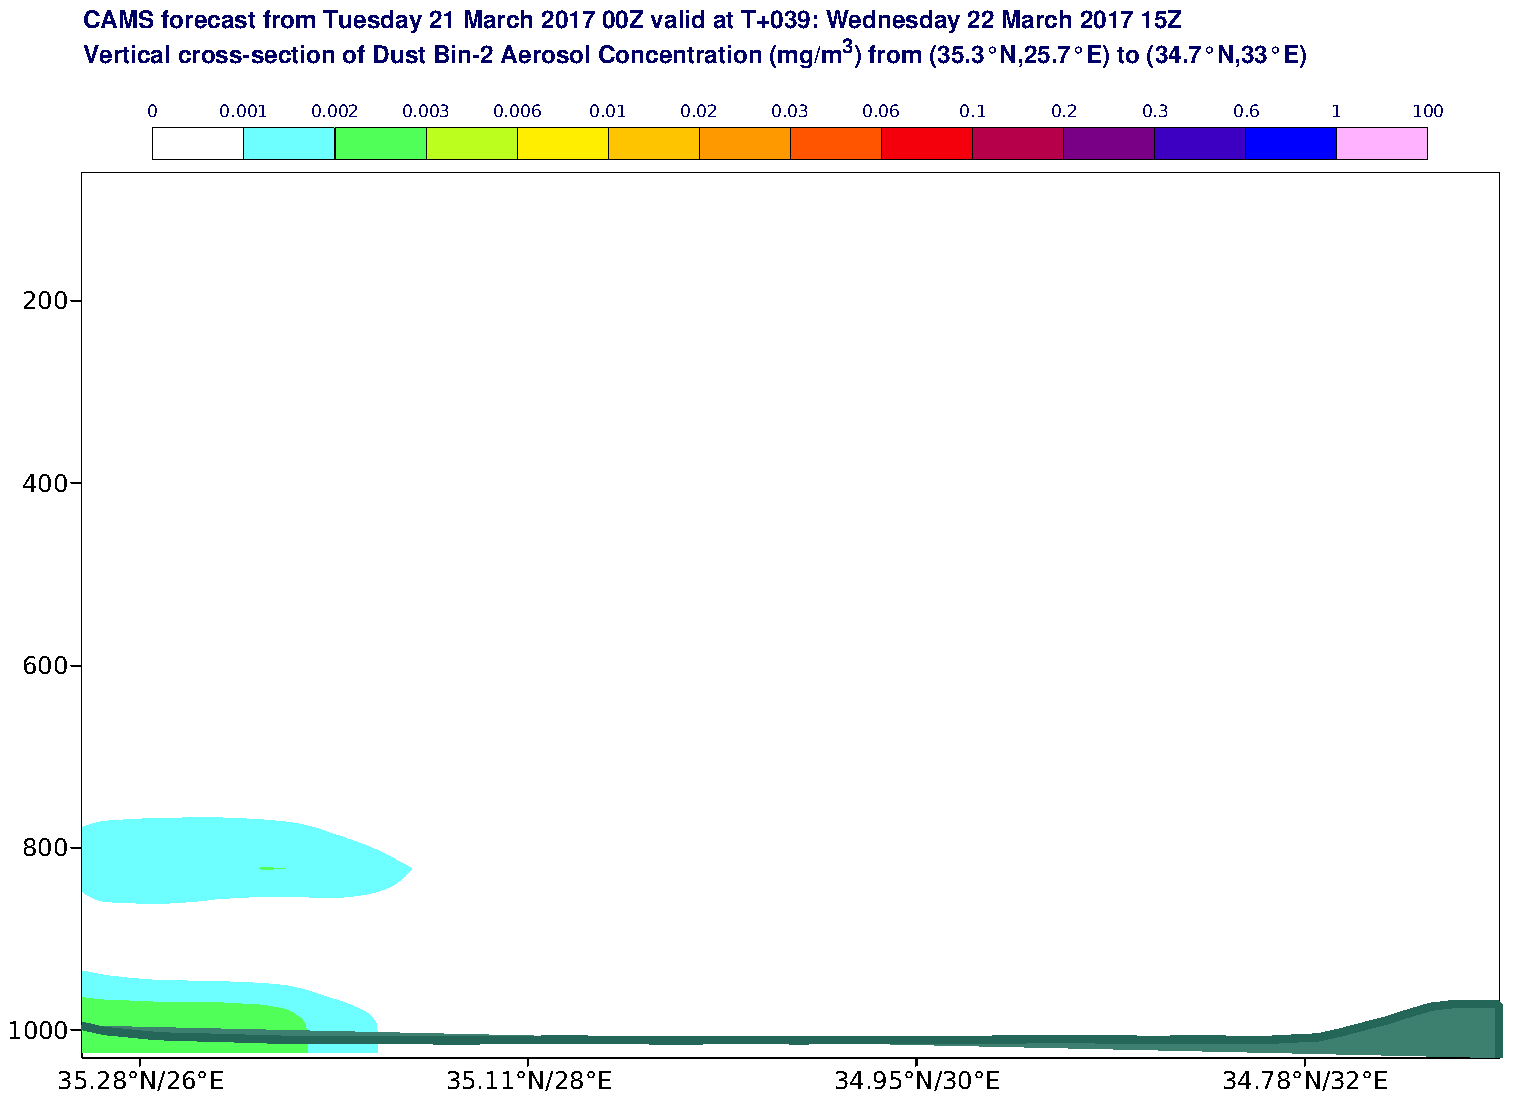 Vertical cross-section of Dust Bin-2 Aerosol Concentration (mg/m3) valid at T39 - 2017-03-22 15:00